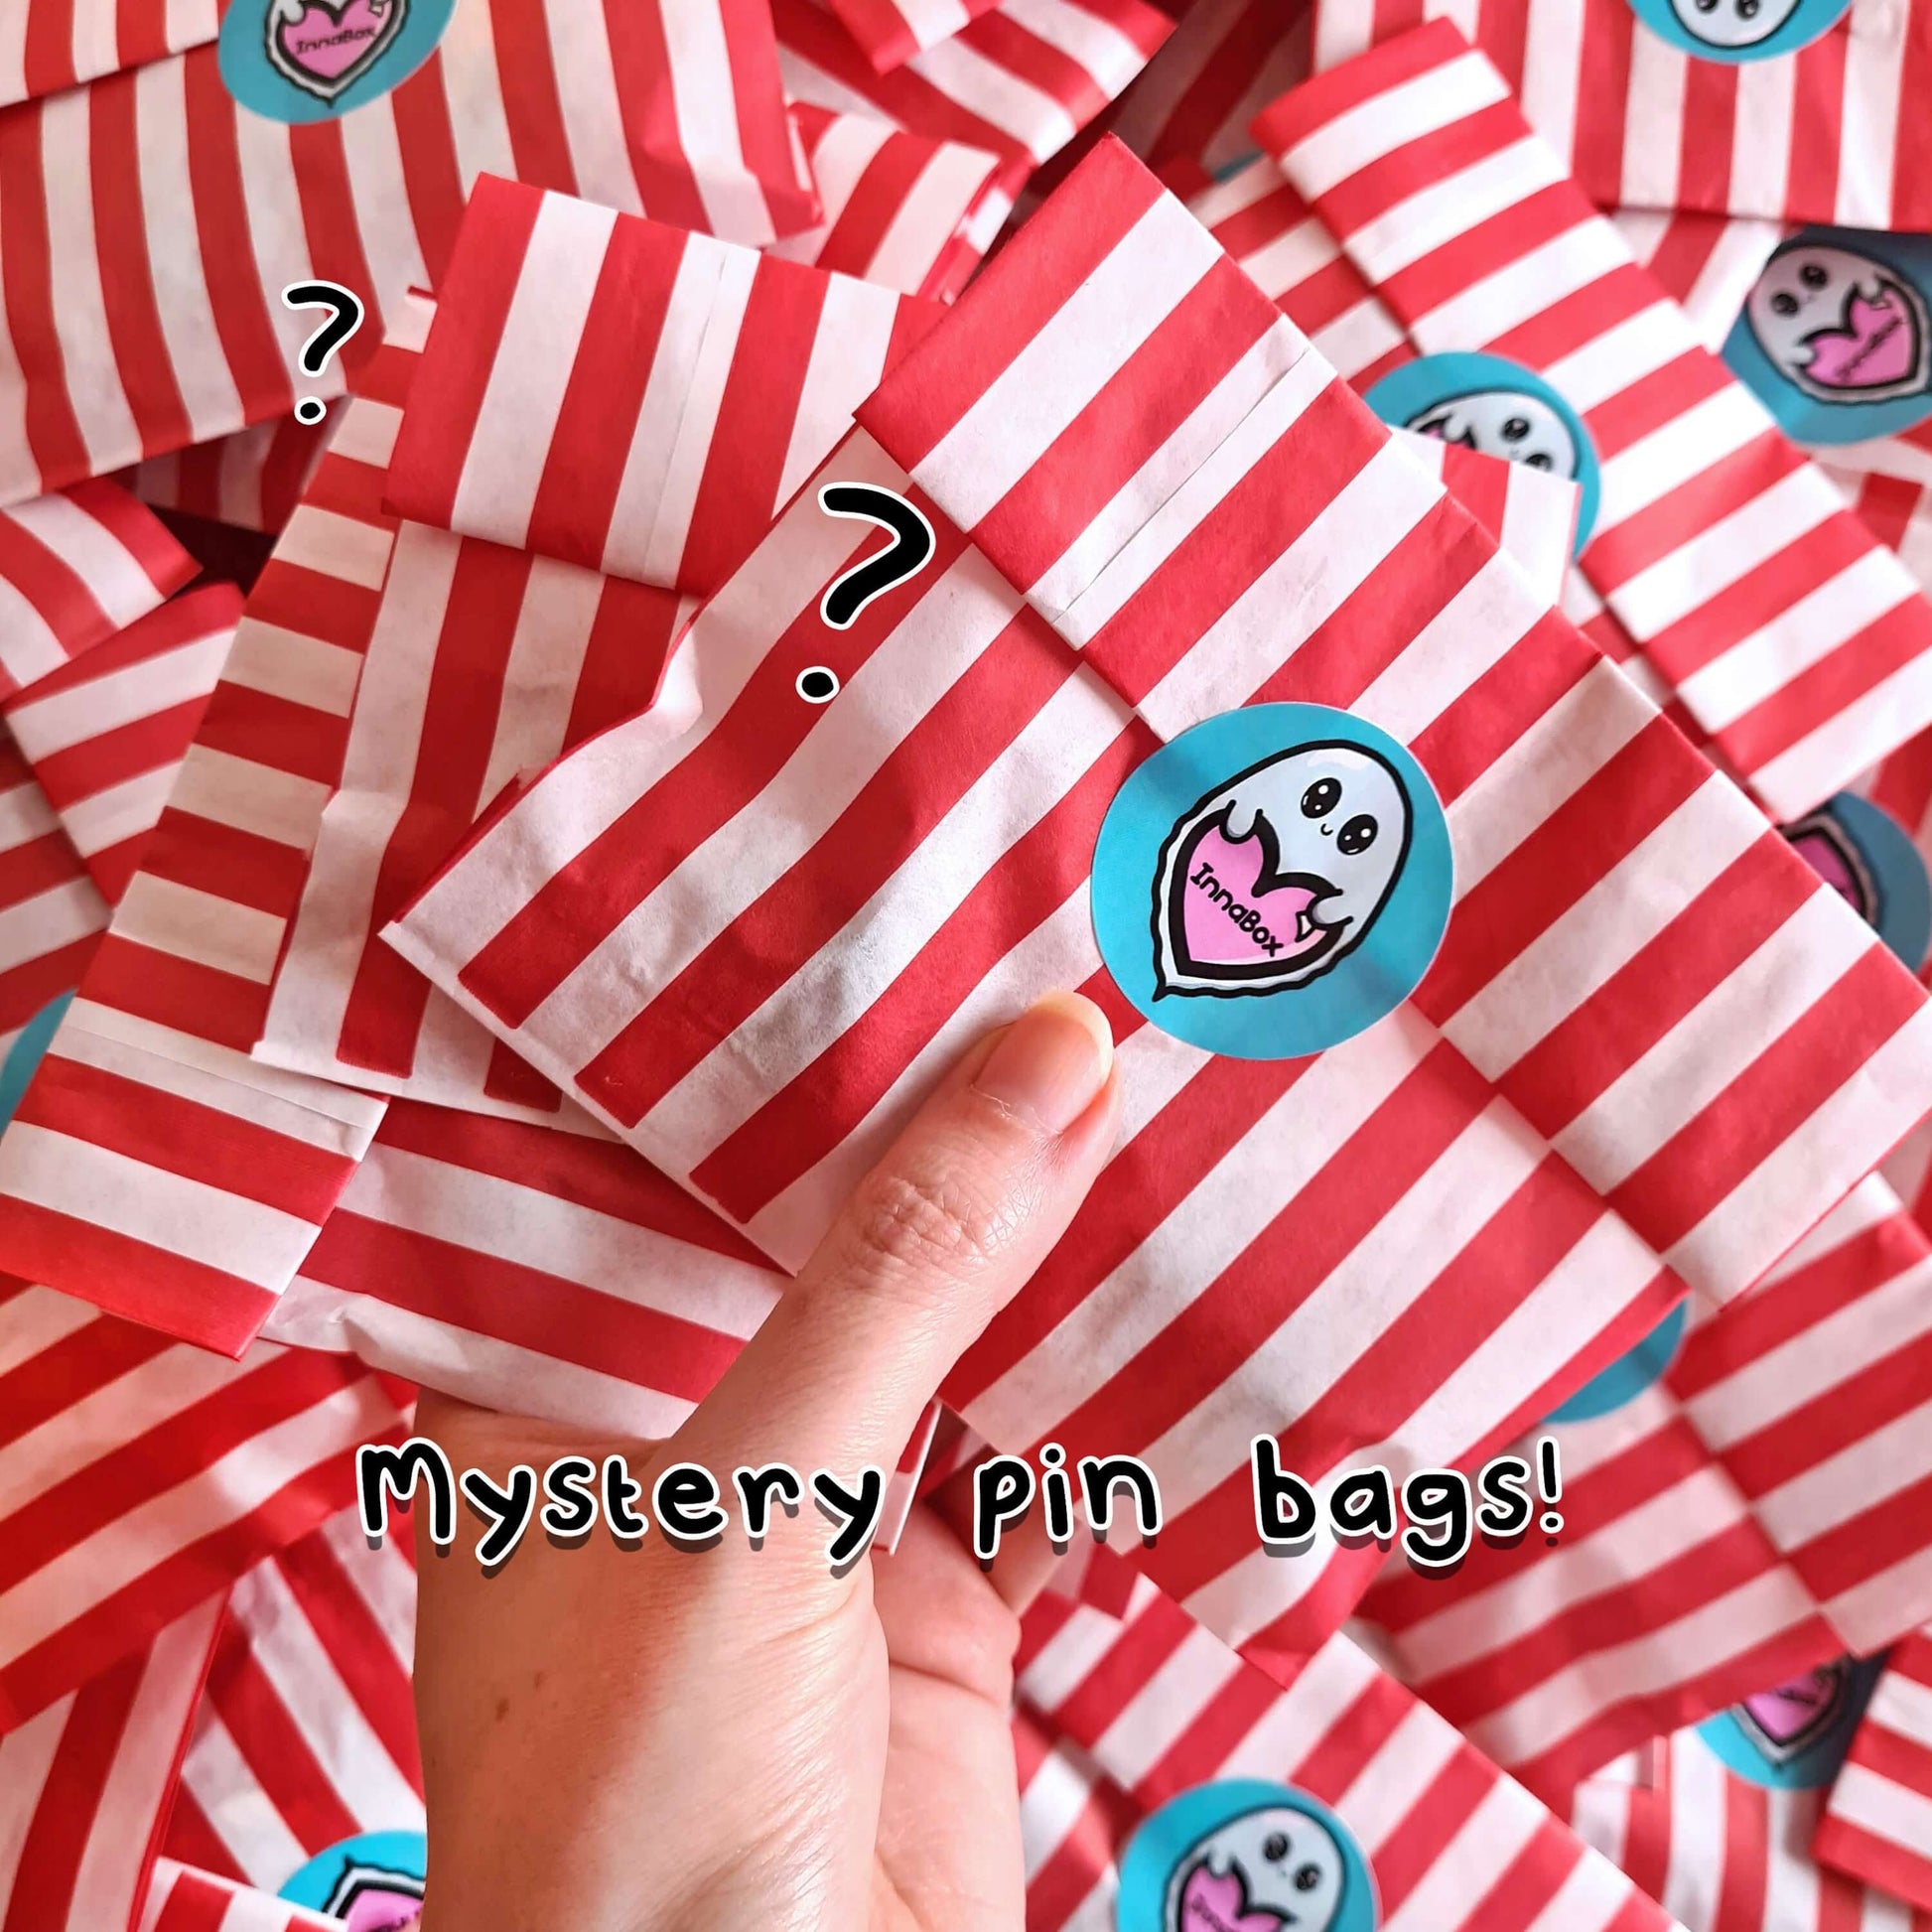 The Mystery Enamel Pin Bag held over a pile of the mystery bags. They are red and white stripe candy bags sealed with the innabox blue ghost logo sticker with black text at the bottom reading 'mystery pin bags!'. A surprise goodie bag full of three enamel pins raising awareness for hidden disabilities and invisible illnesses.